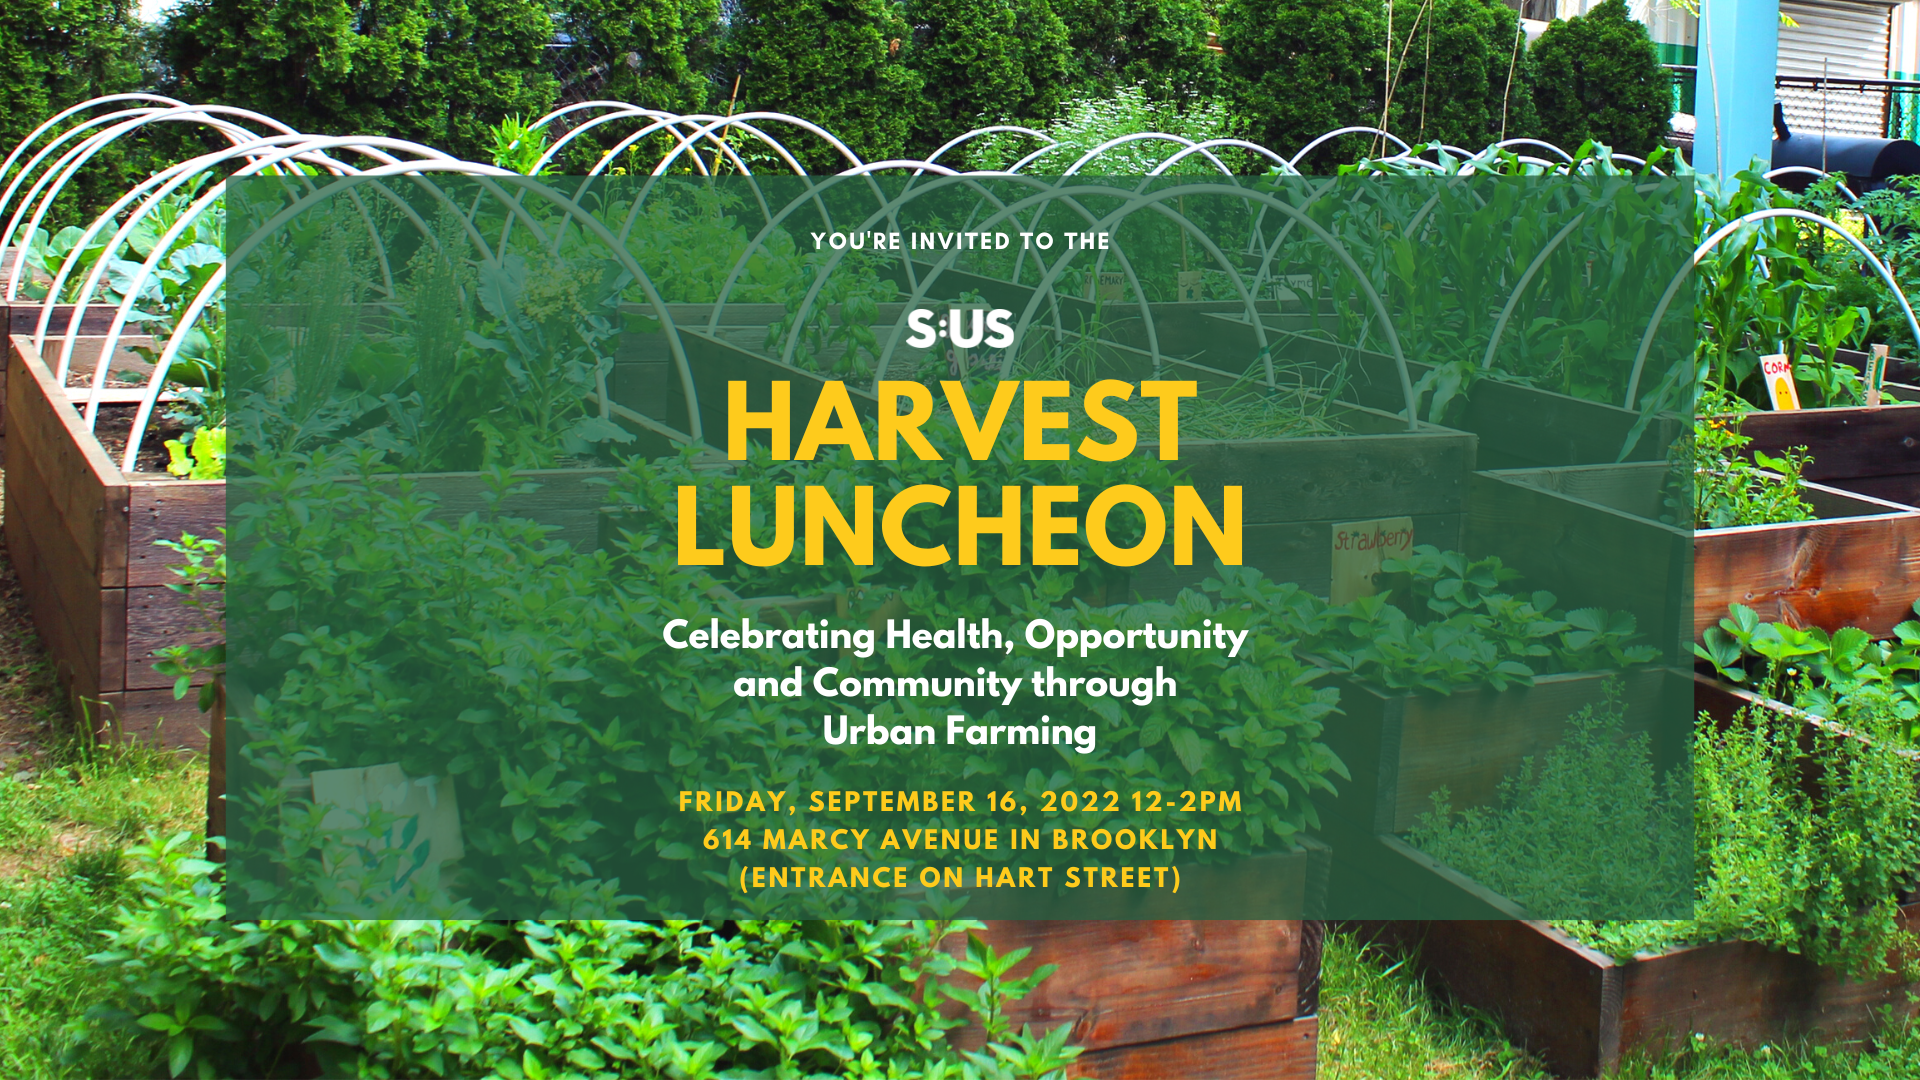 Join Our Harvest Luncheon on September 16